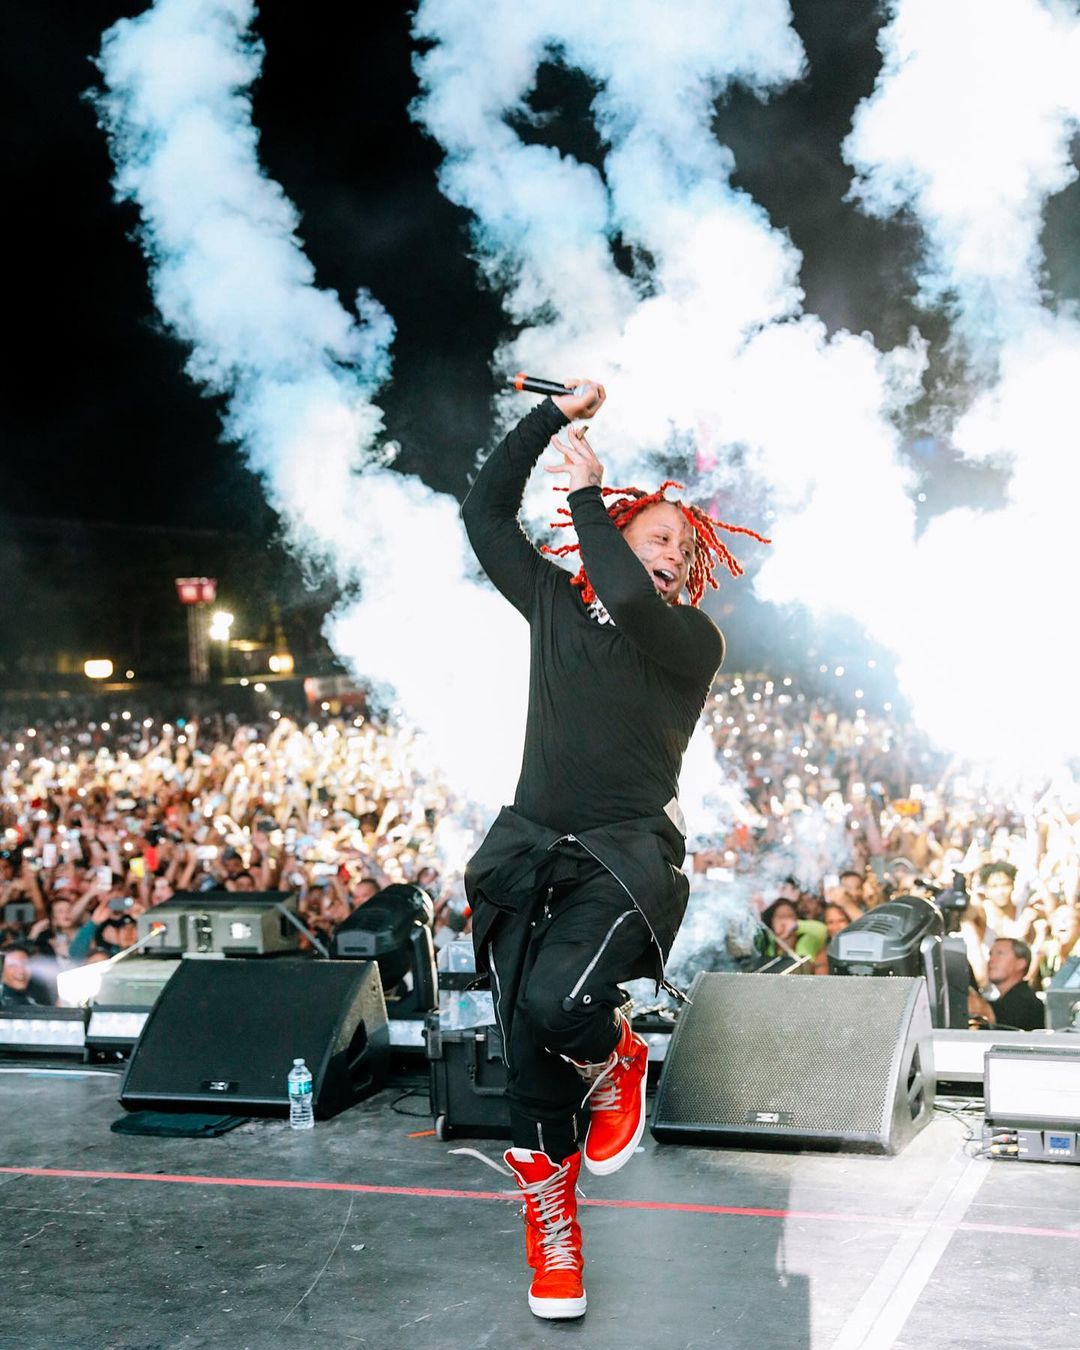 Trippie Redd Releases Album 'Trip At Knight' Loaded with Features Including Lil Uzi, Playboi Carti, Drake, and More